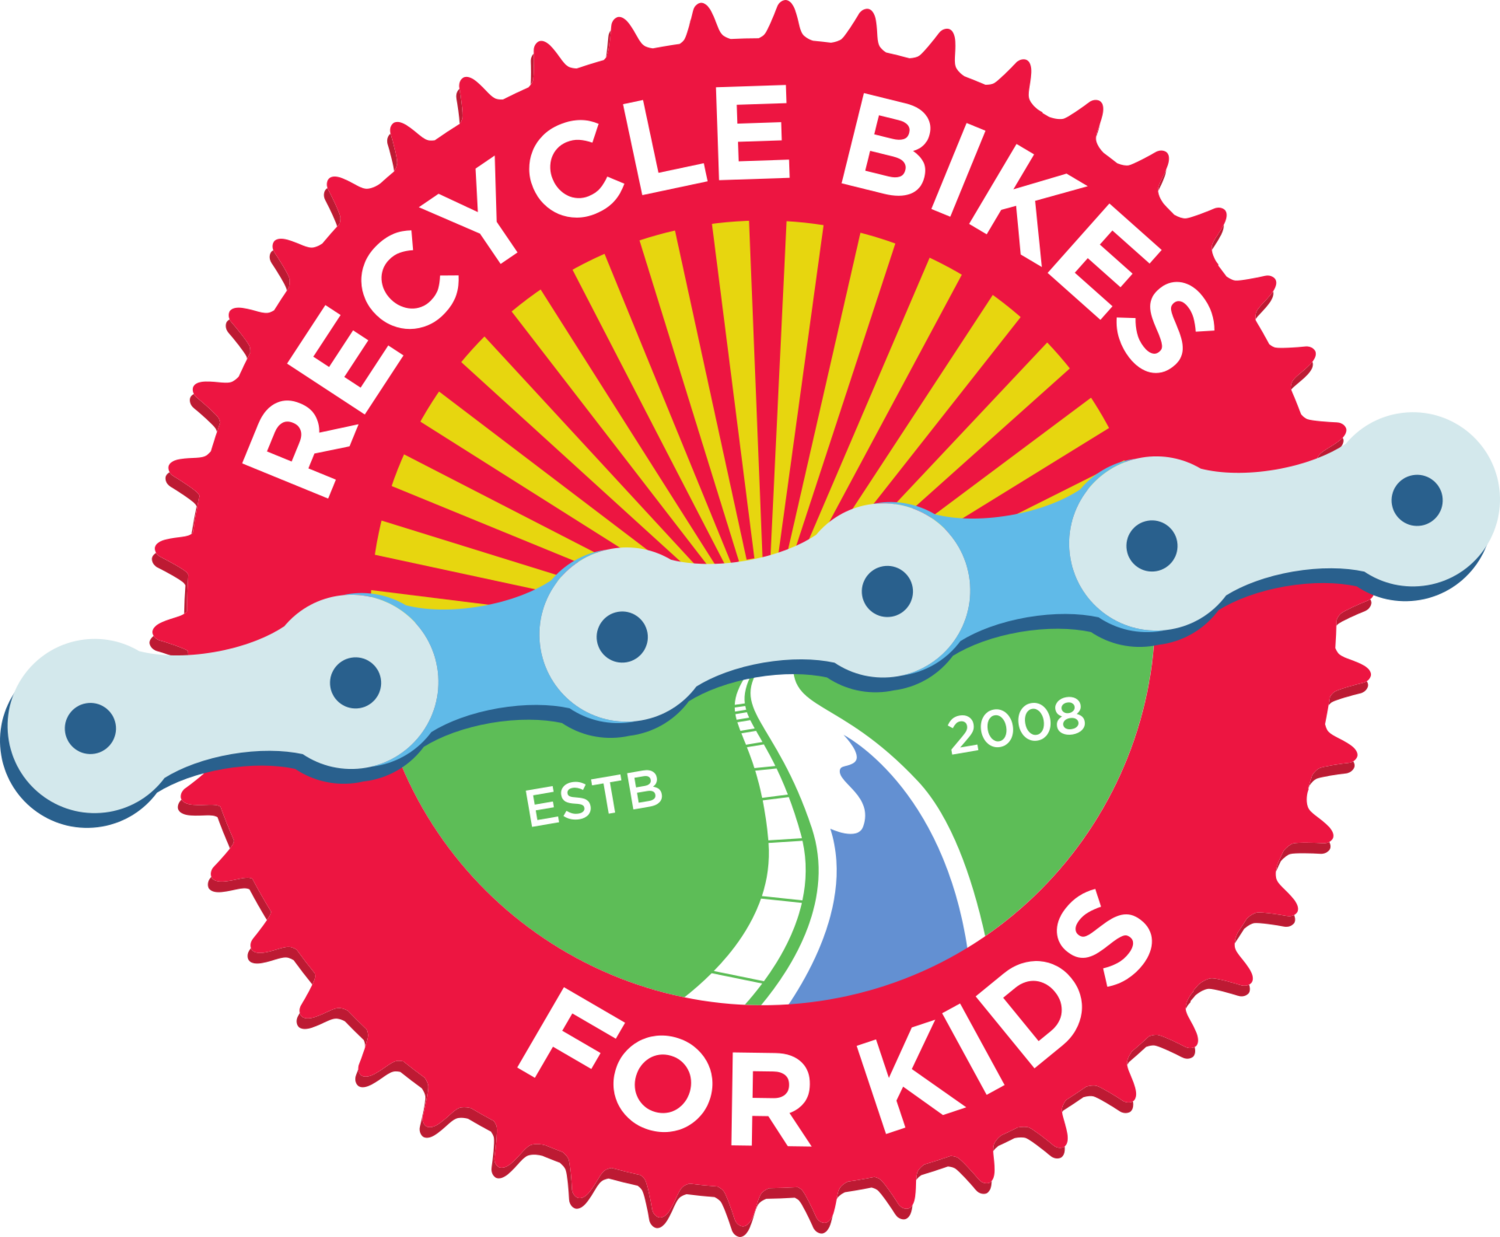 Recycle Bikes For Kids